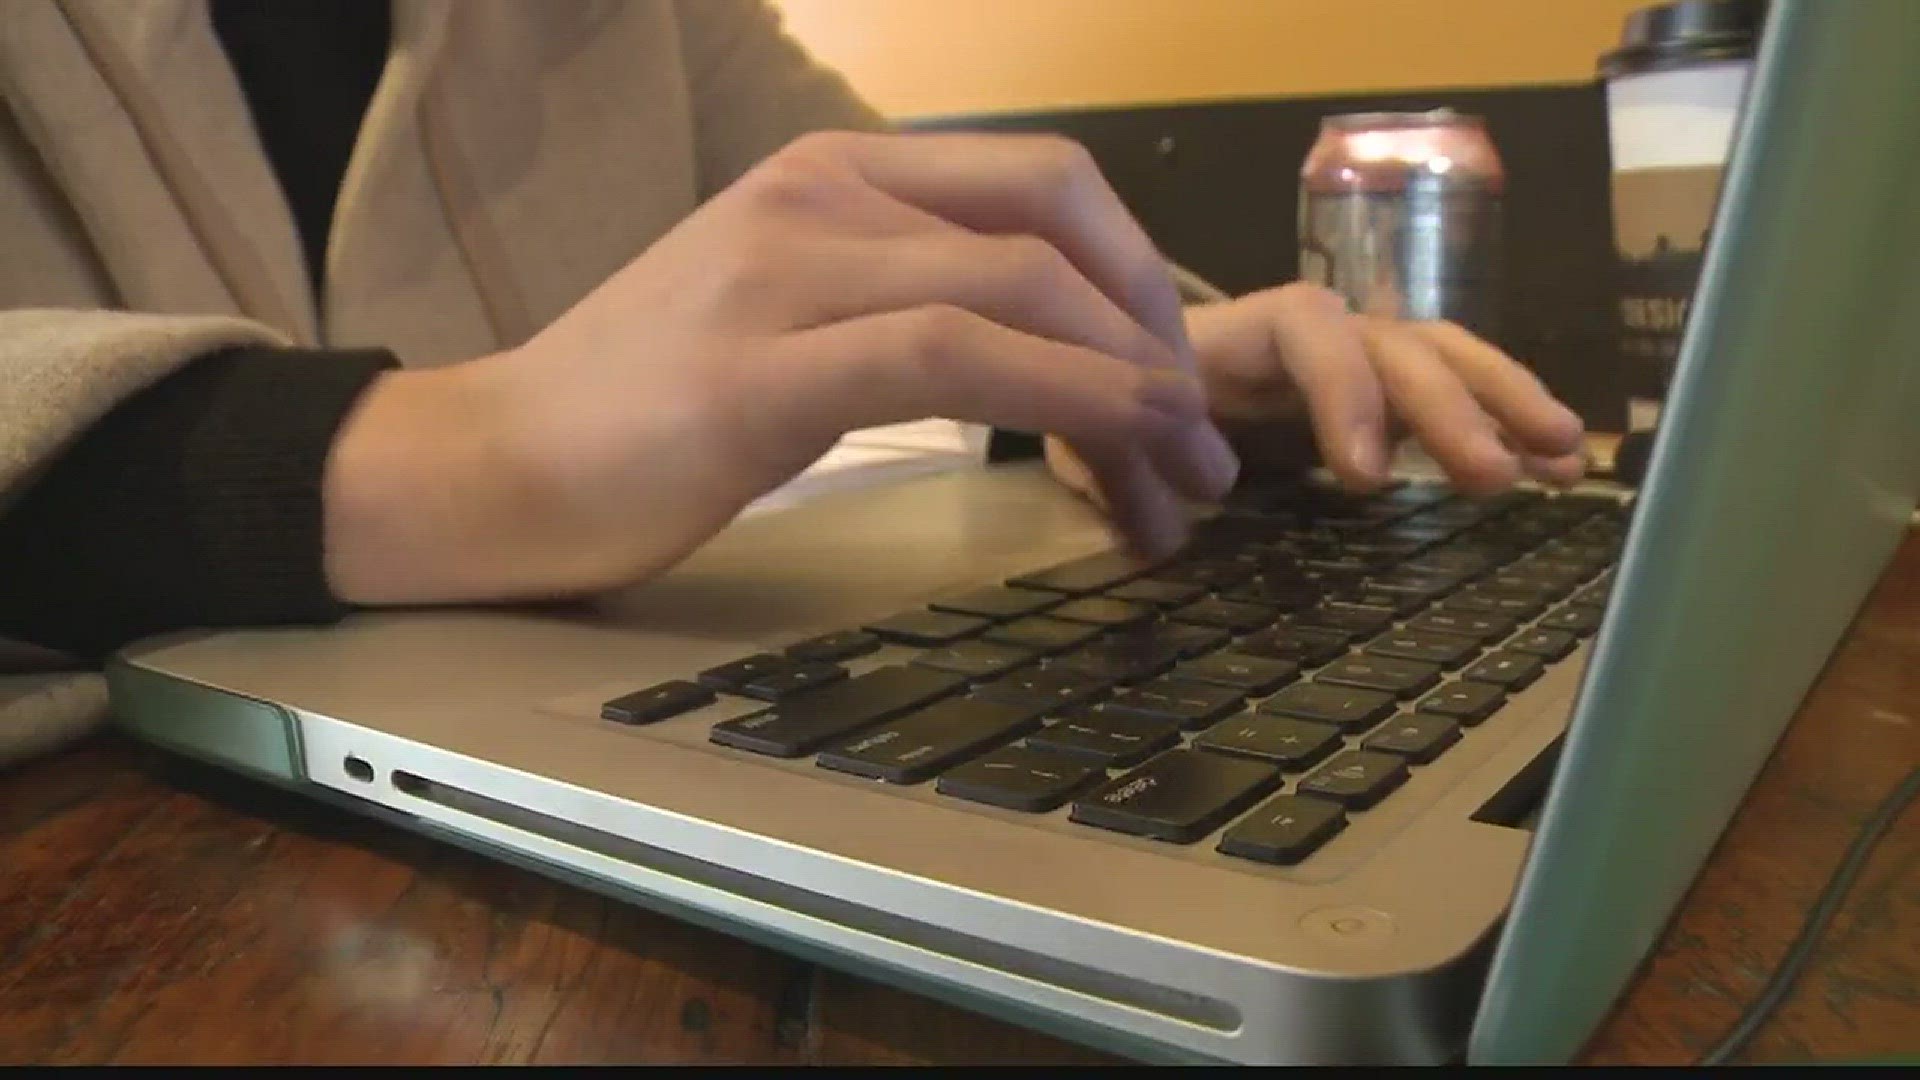 NOW: Internet privacy at risk